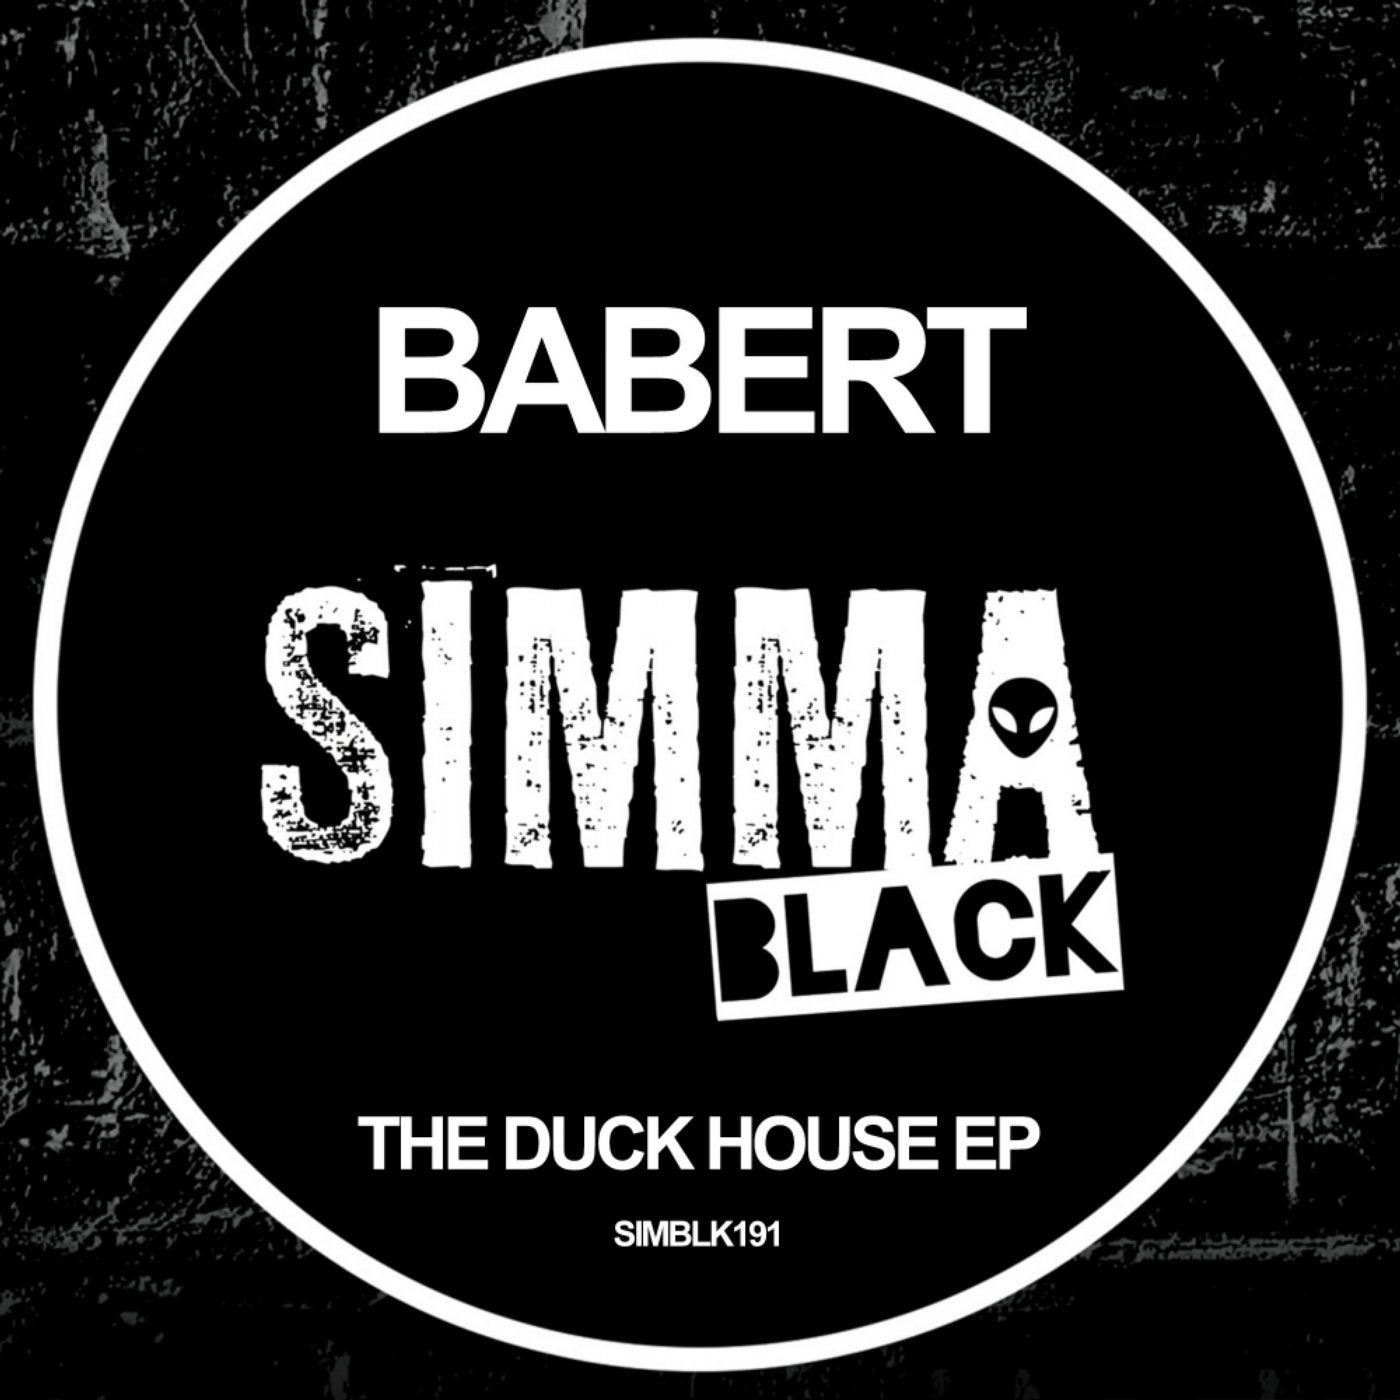 The Duck House EP